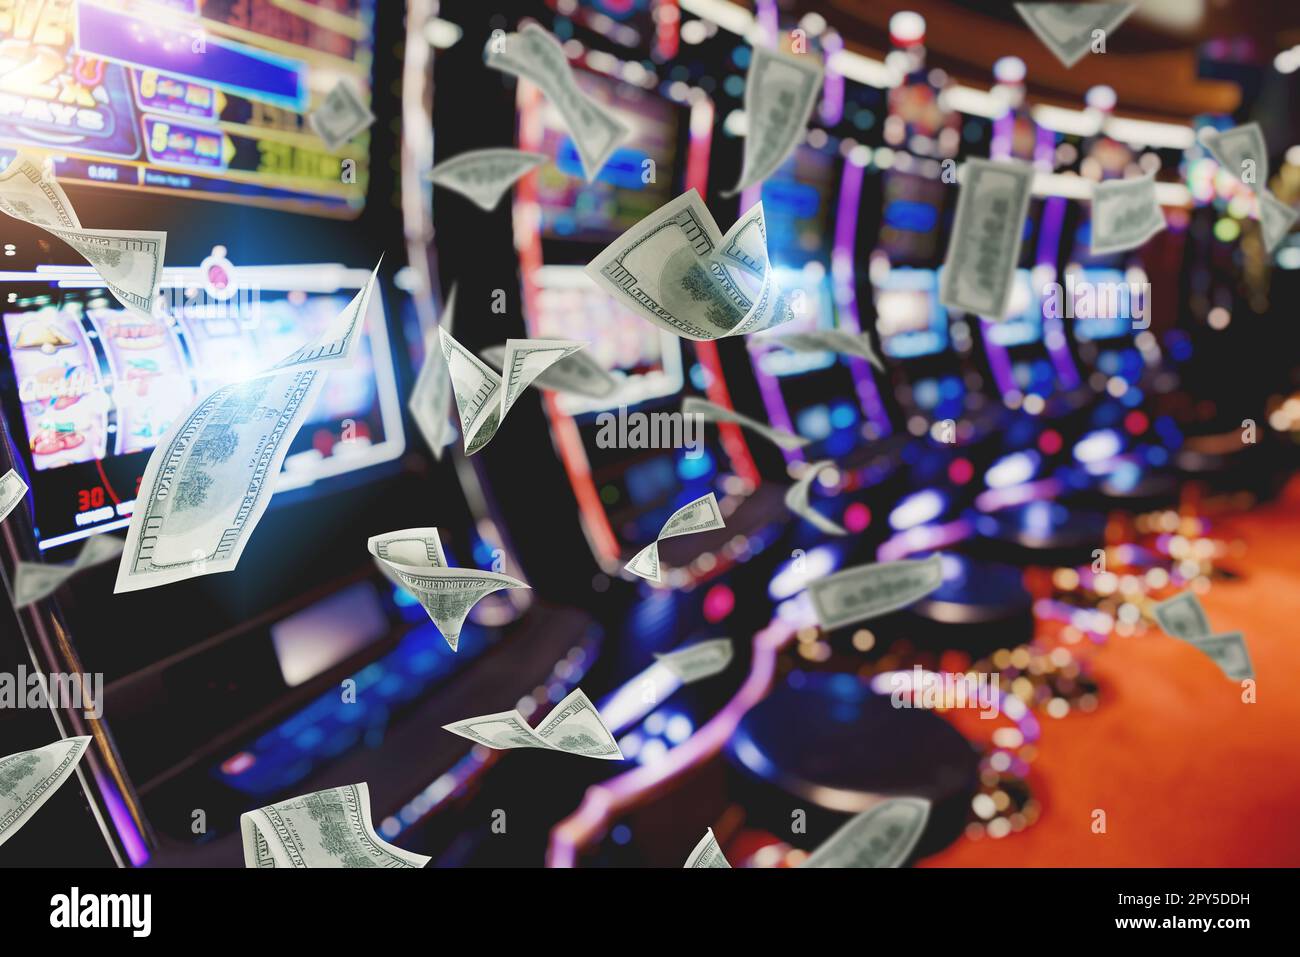 Play casino with money bets and games of chance Stock Photo